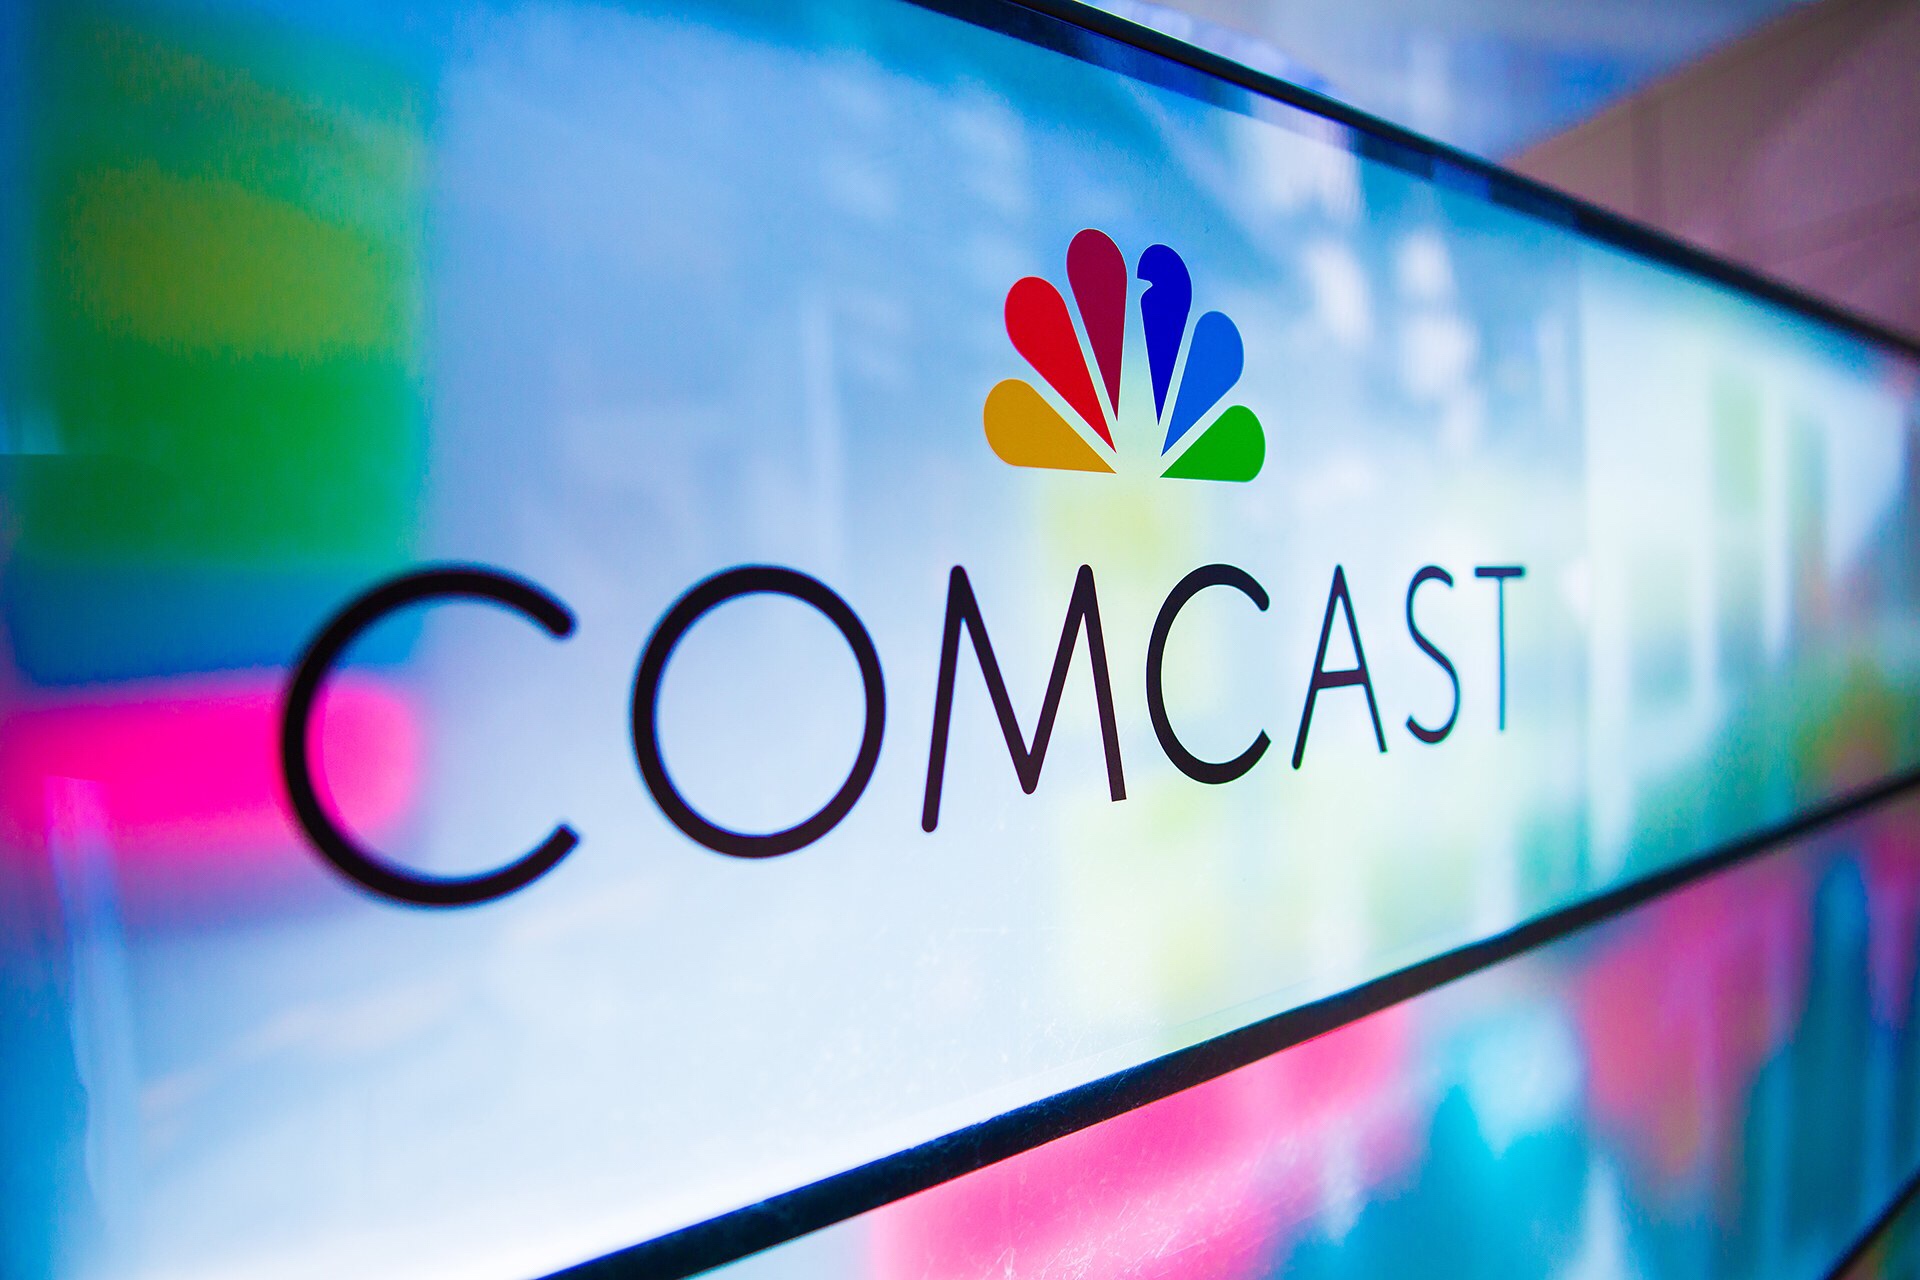 If taking down net neutrality wasn’t enough, Comcast and Charter want Congress to put repeal into law